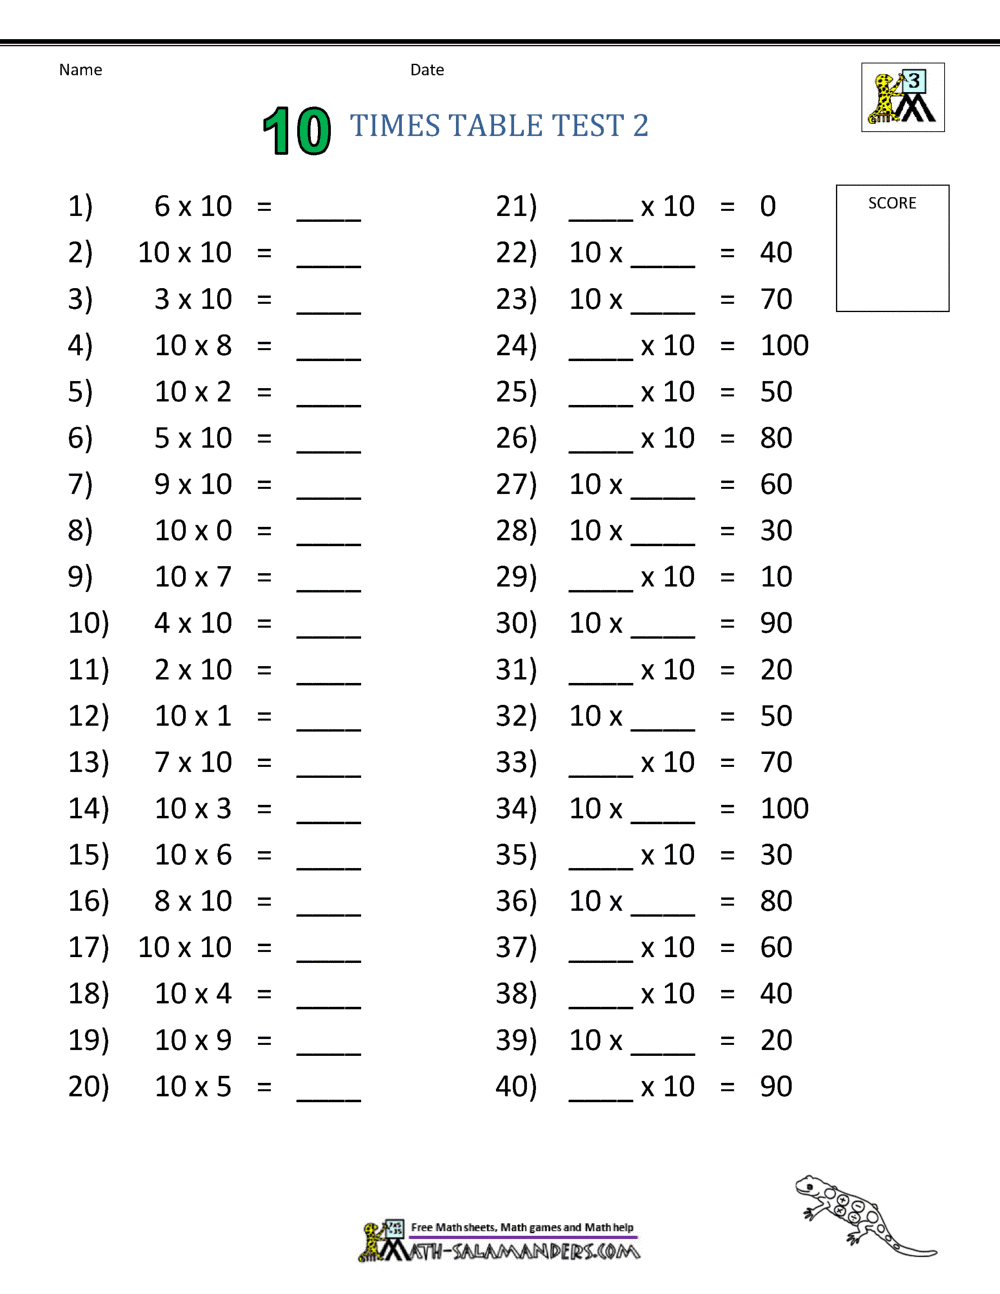 Practice Times Tables Worksheets 10 Times Table